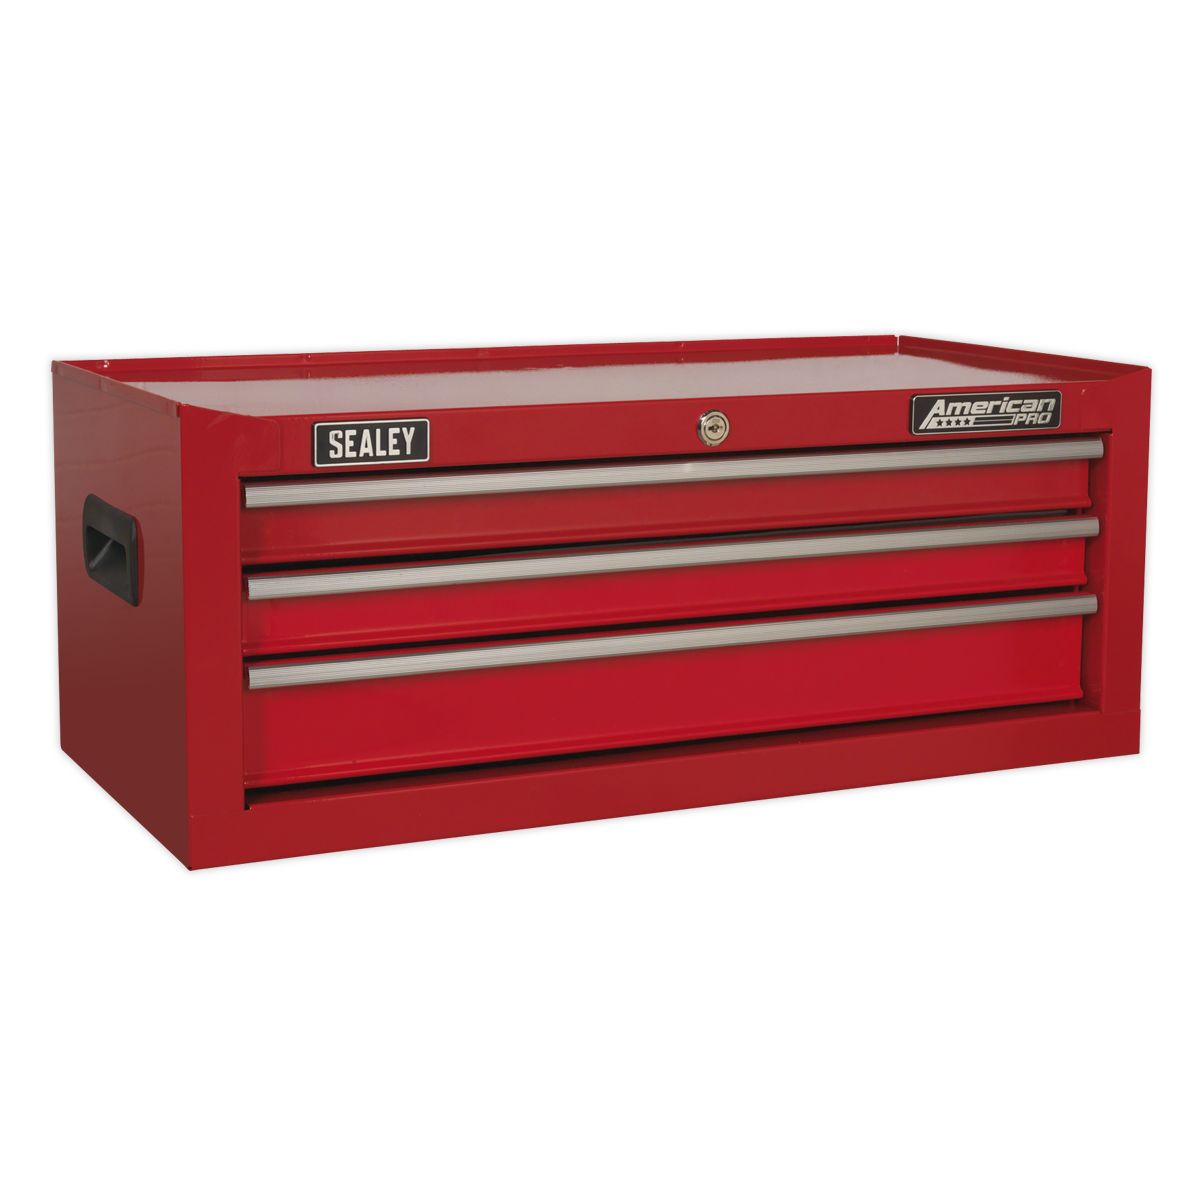 Sealey AP223 Mid-Box 3 Drawer with Ball Bearing Slides - Red